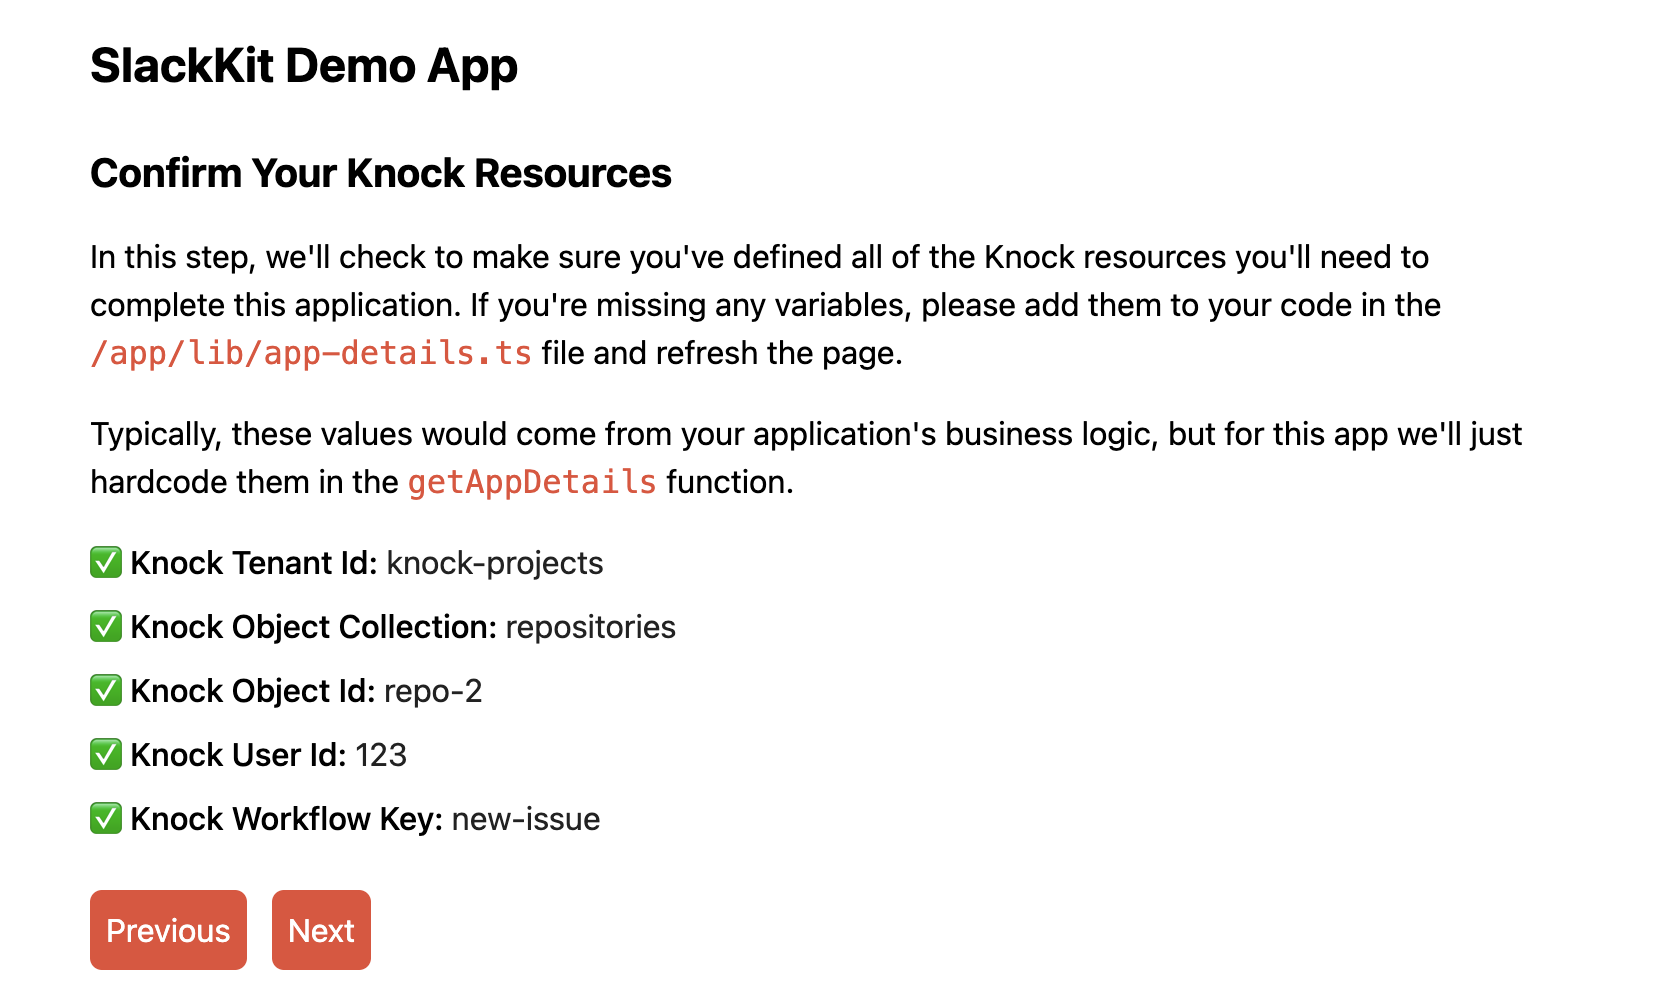 confirm knock resources